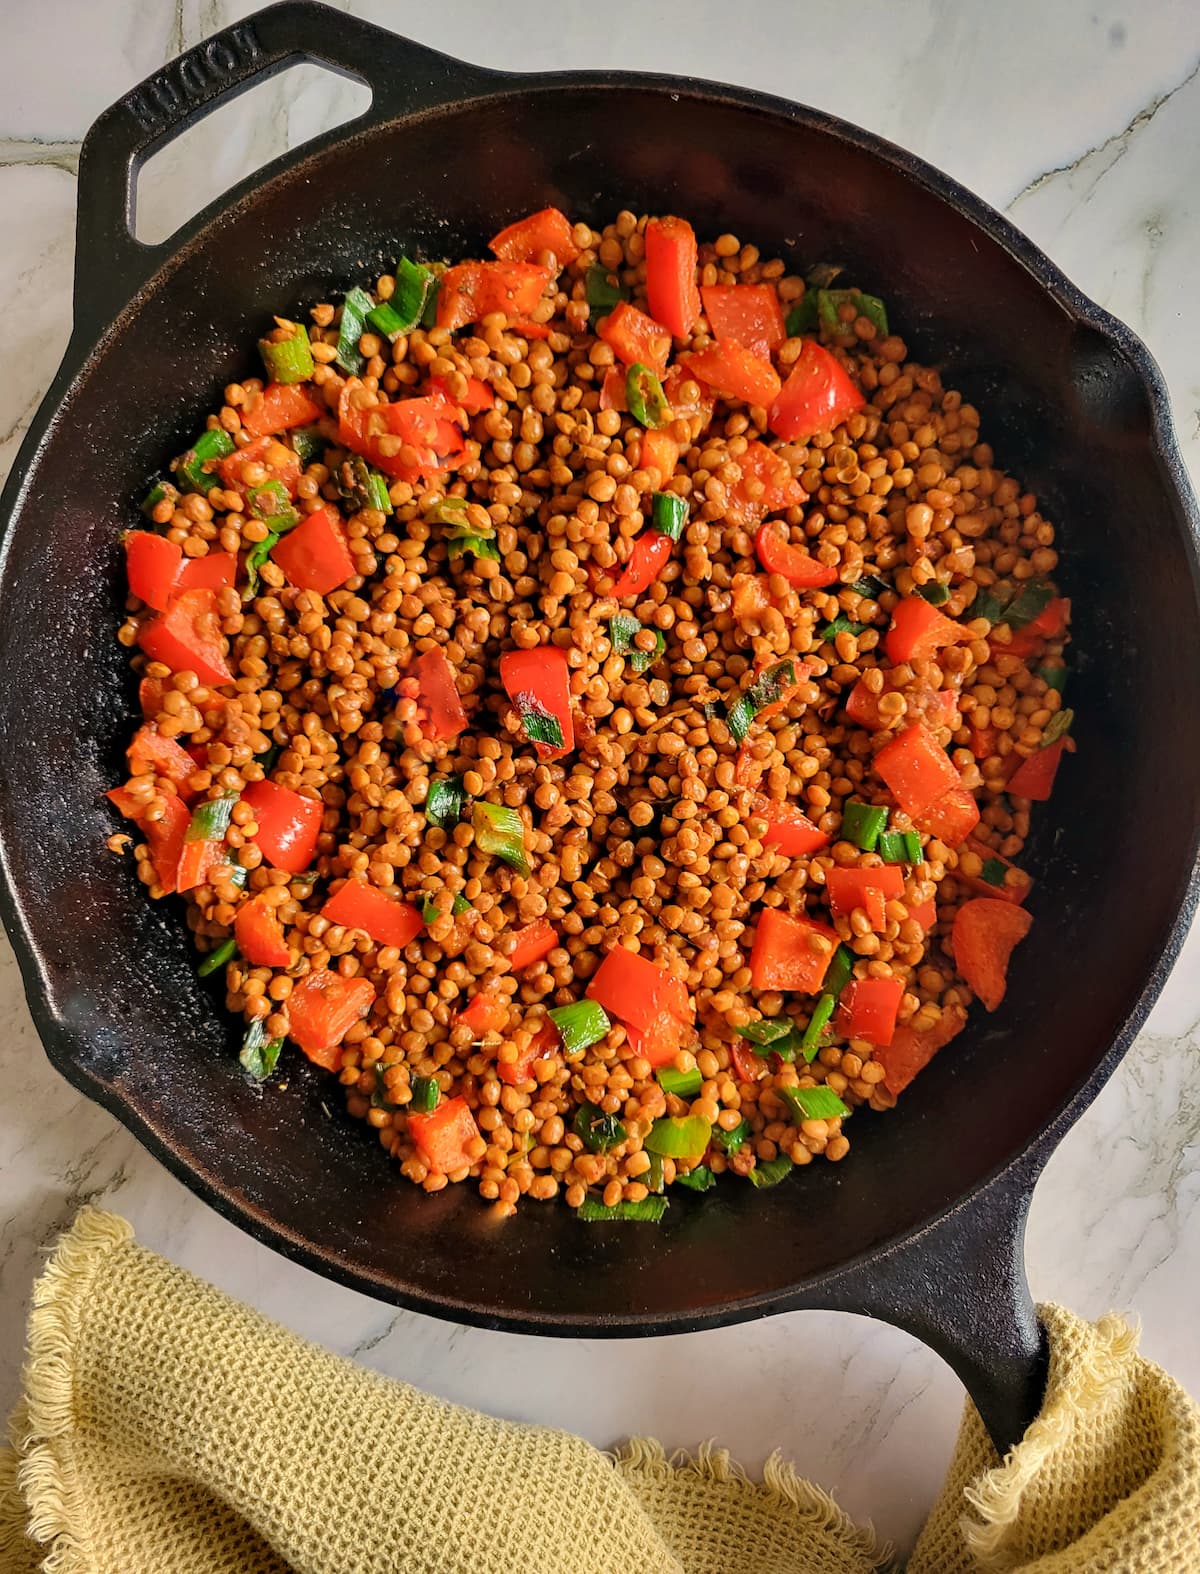 cast iron skillet with lentils, diced red peppers and green onions